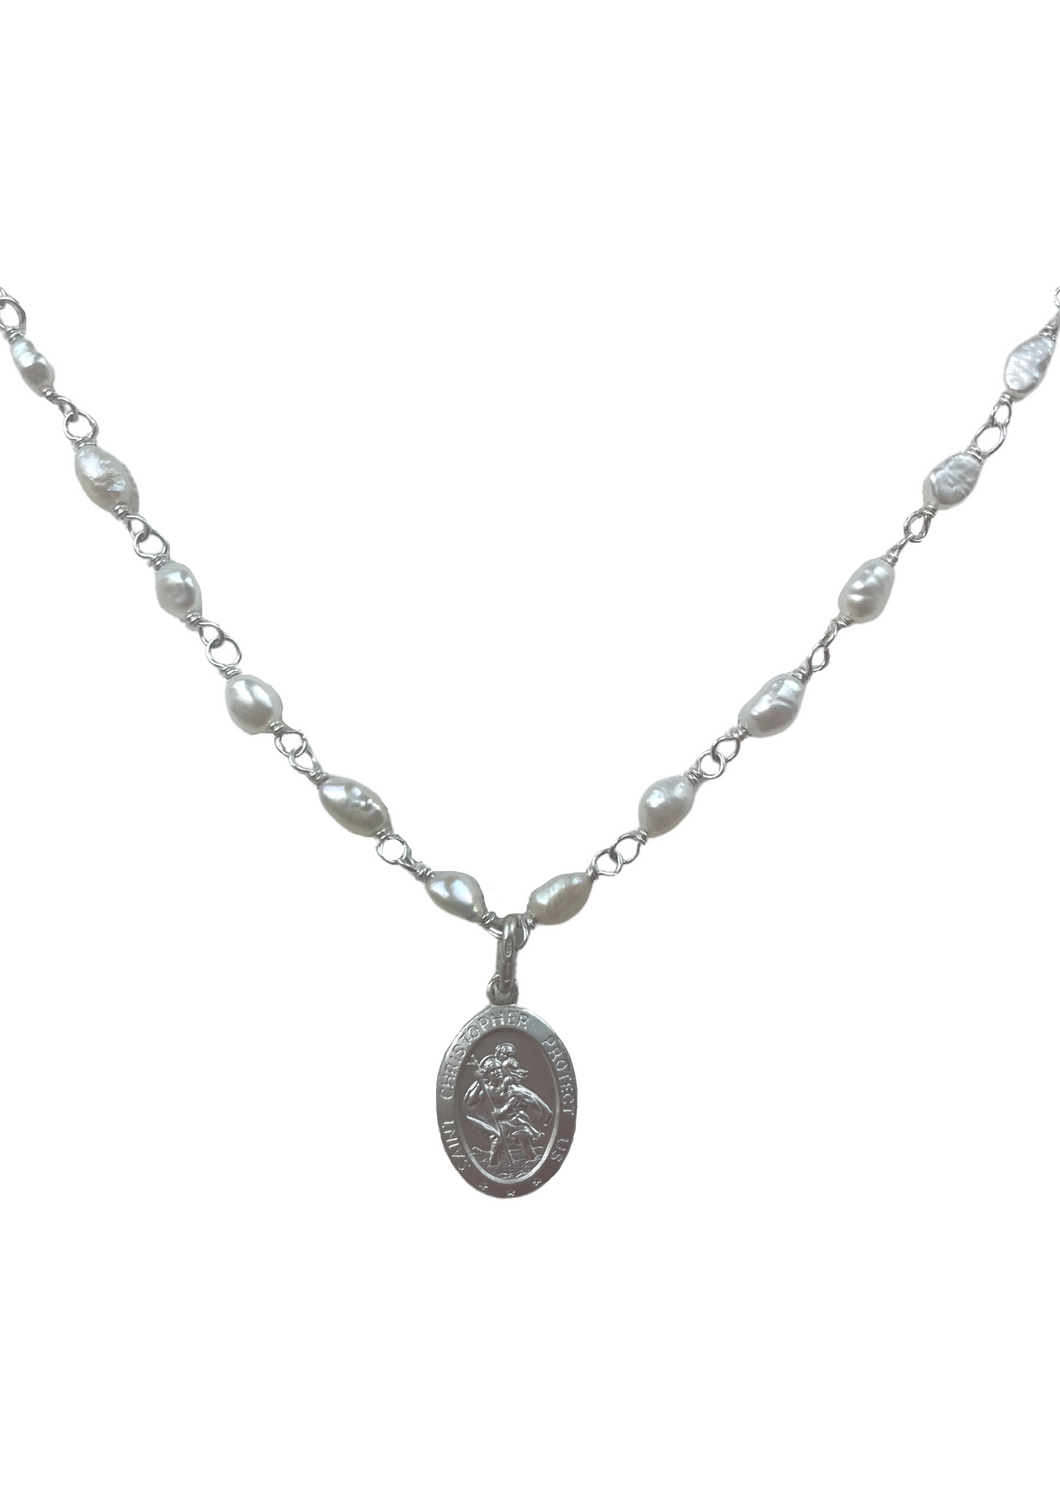 The St. Christopher Pearl